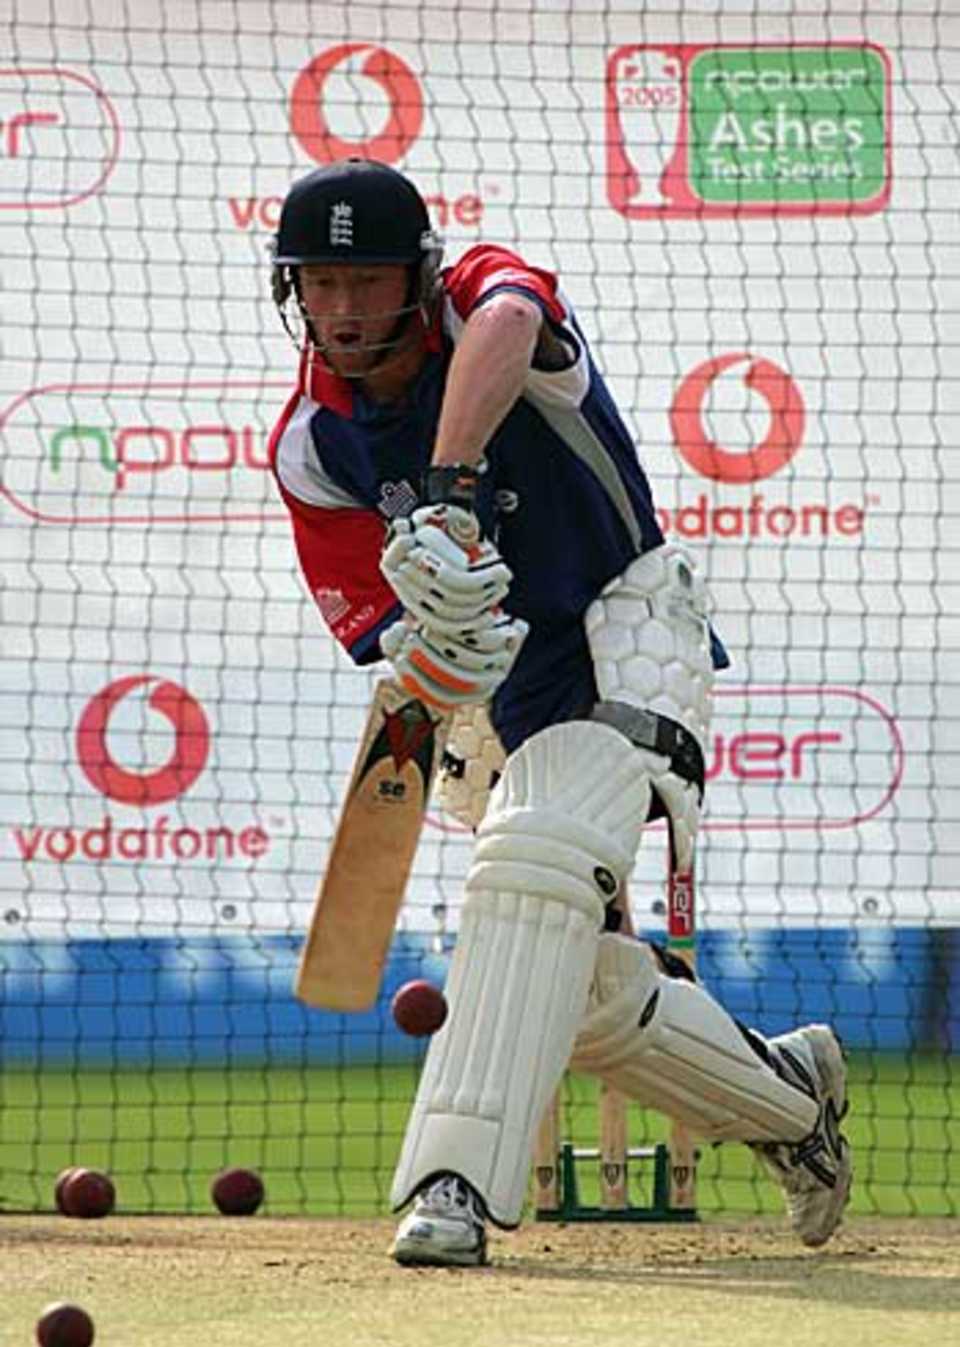 Paul Collingwood may start his first home Test